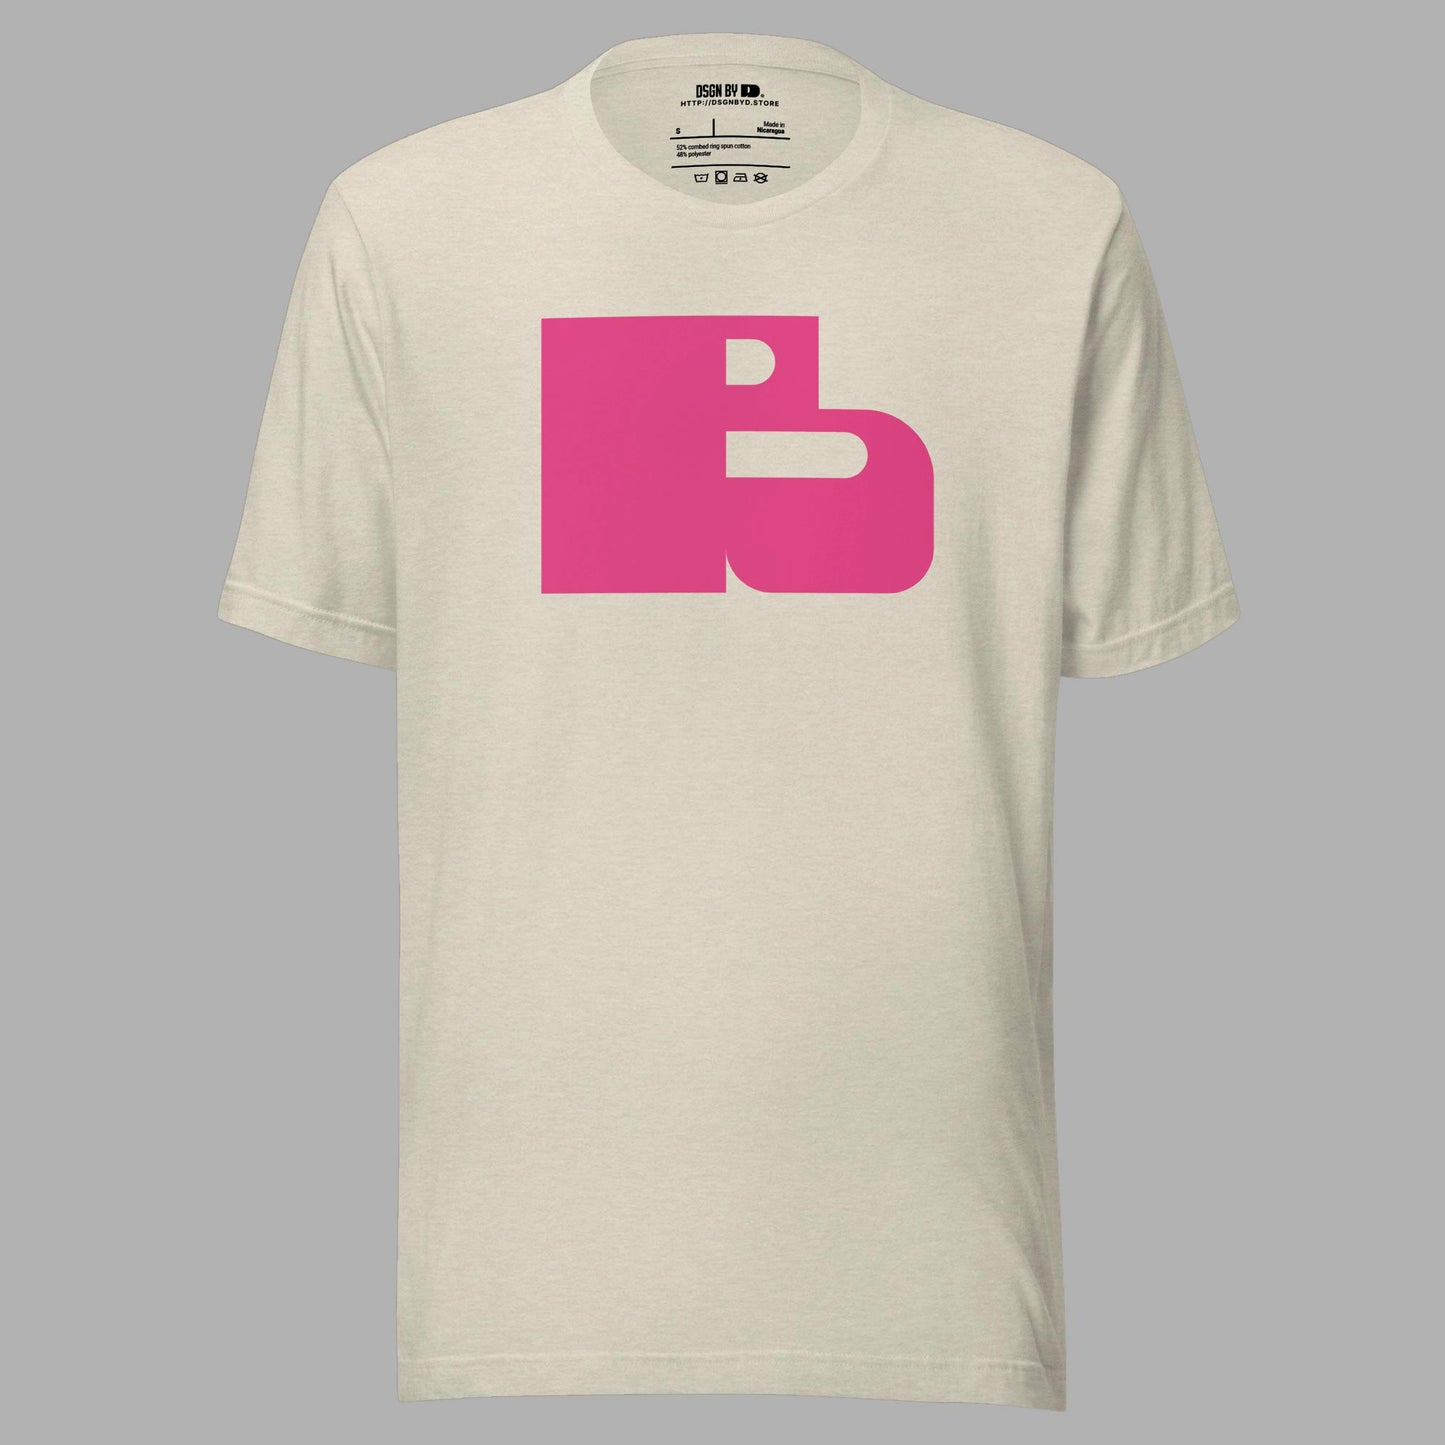 A beige cotton unisex graphic tee with letter B.